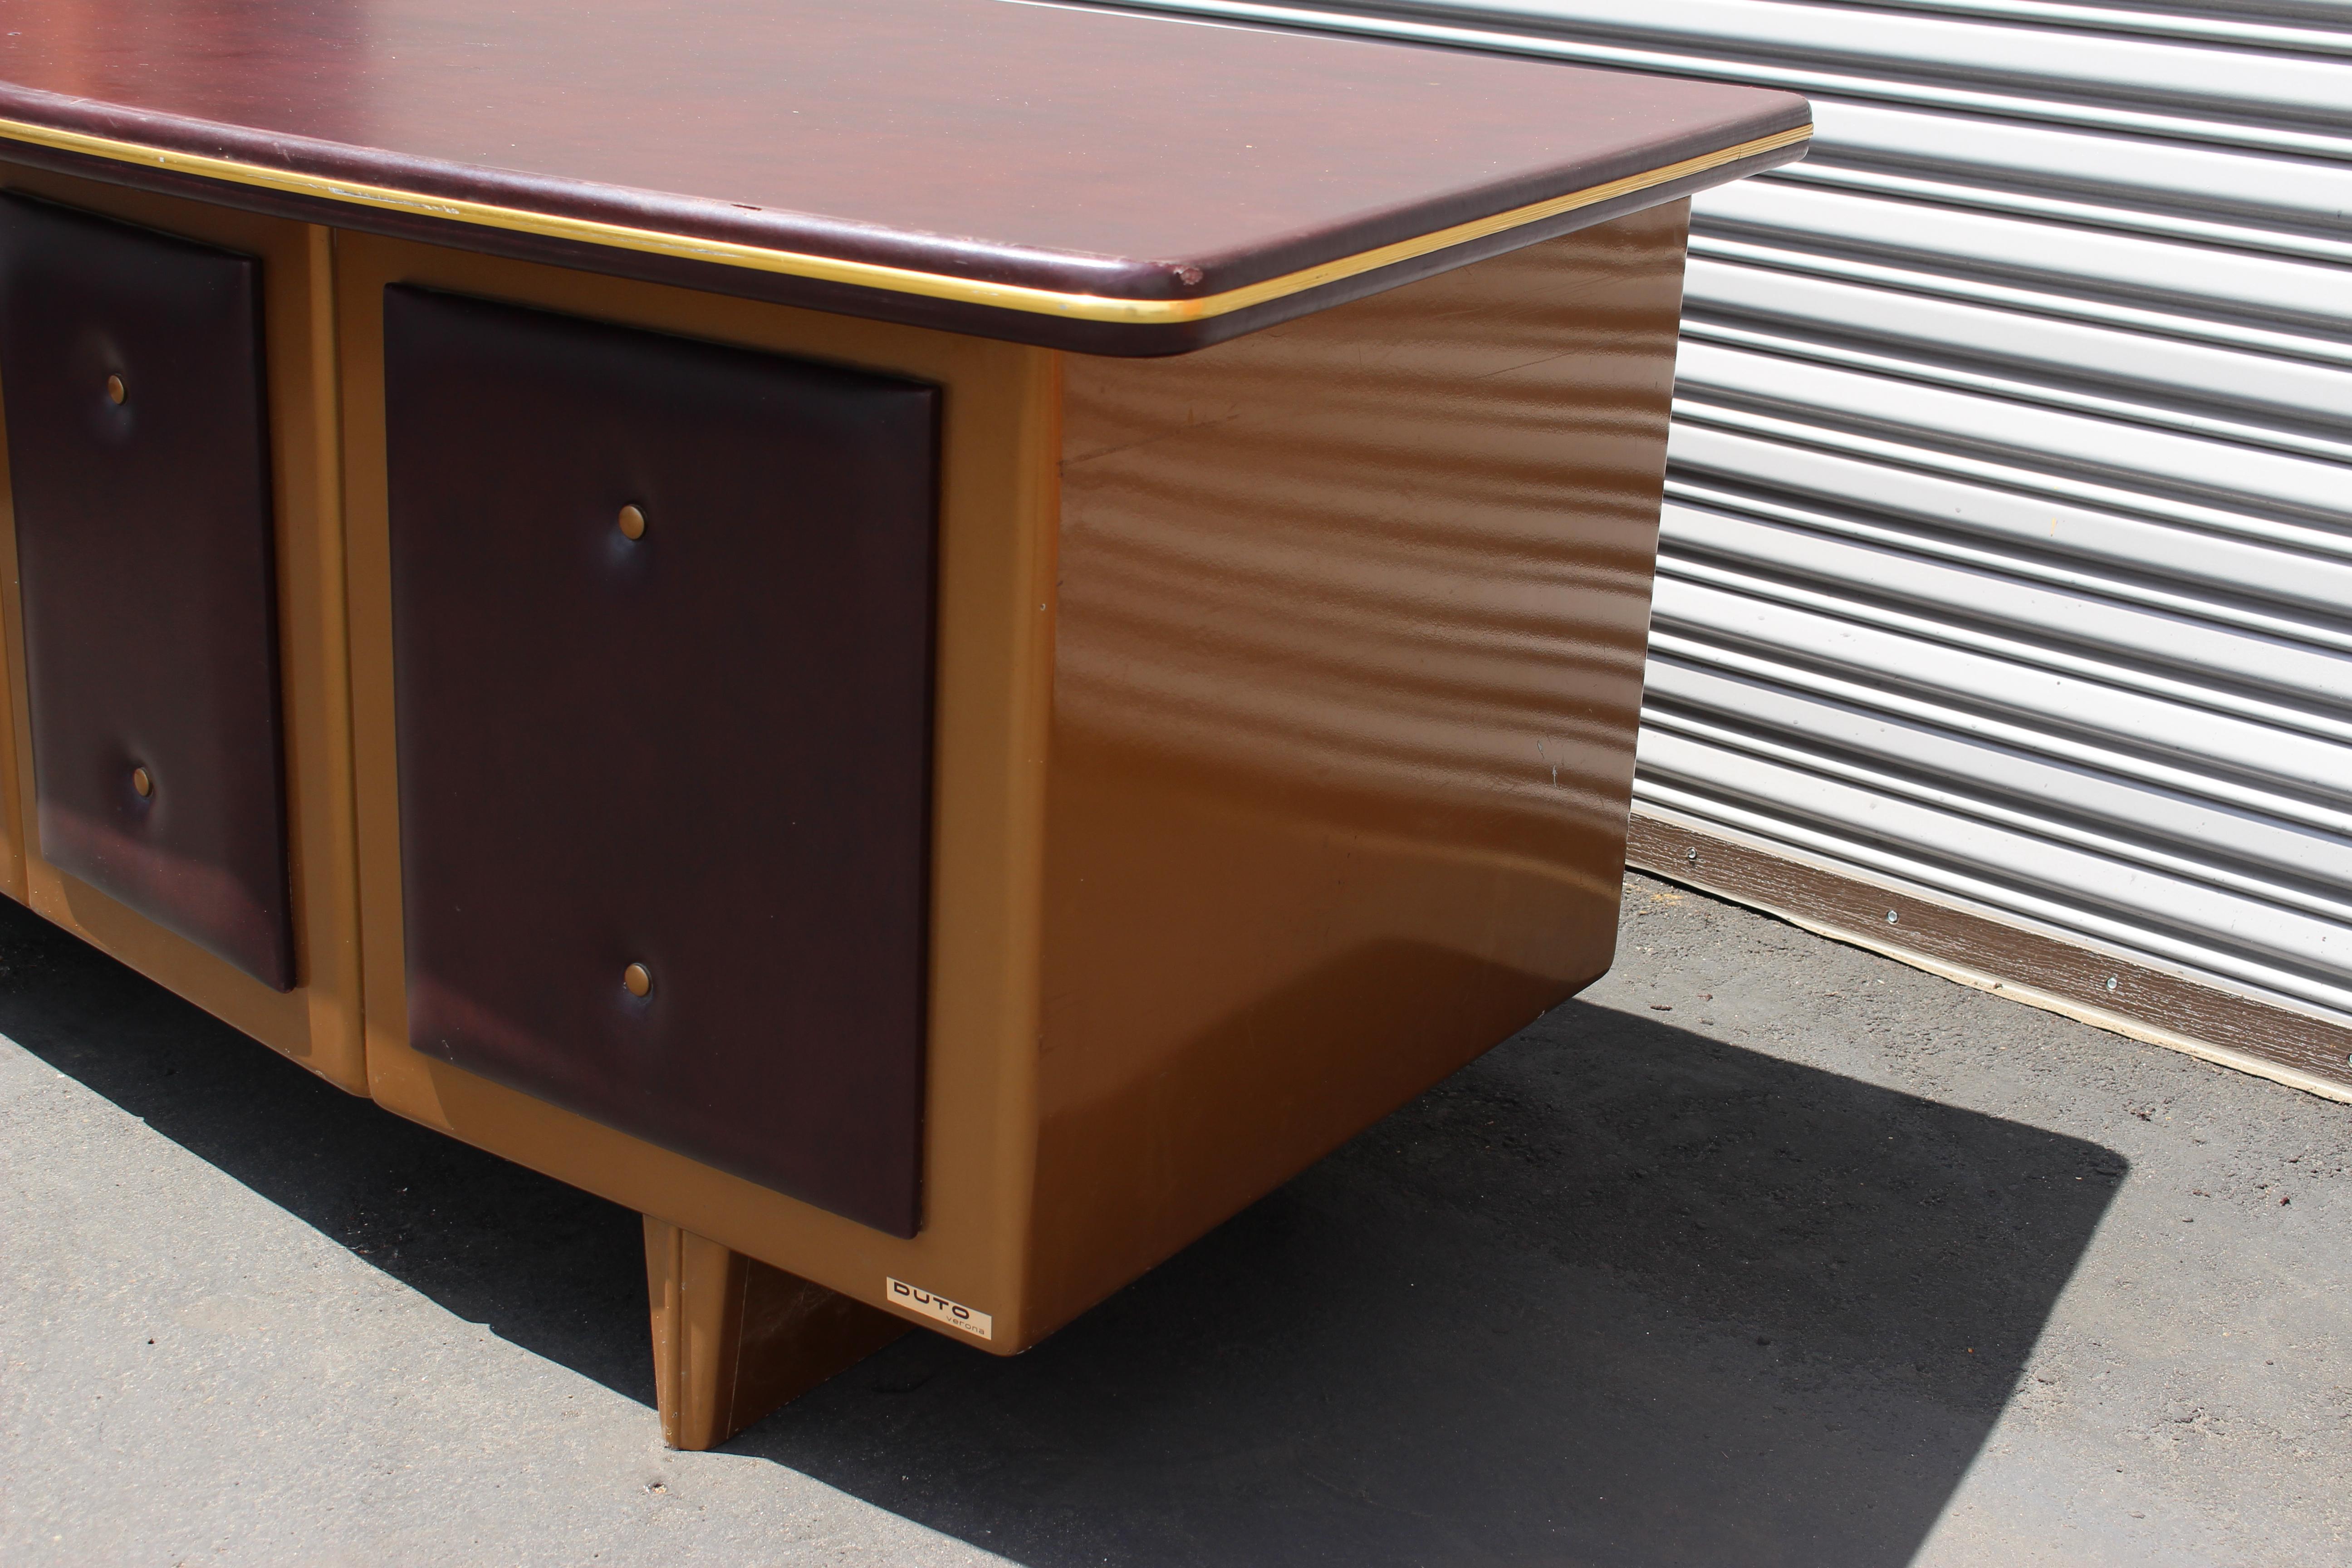 Italian metal desk, 1960s by Duto. Metal desk with the vinyl top and the some vinyl in the front .Antique gold color on the metal and the Burgundy vinyl on the front and top.